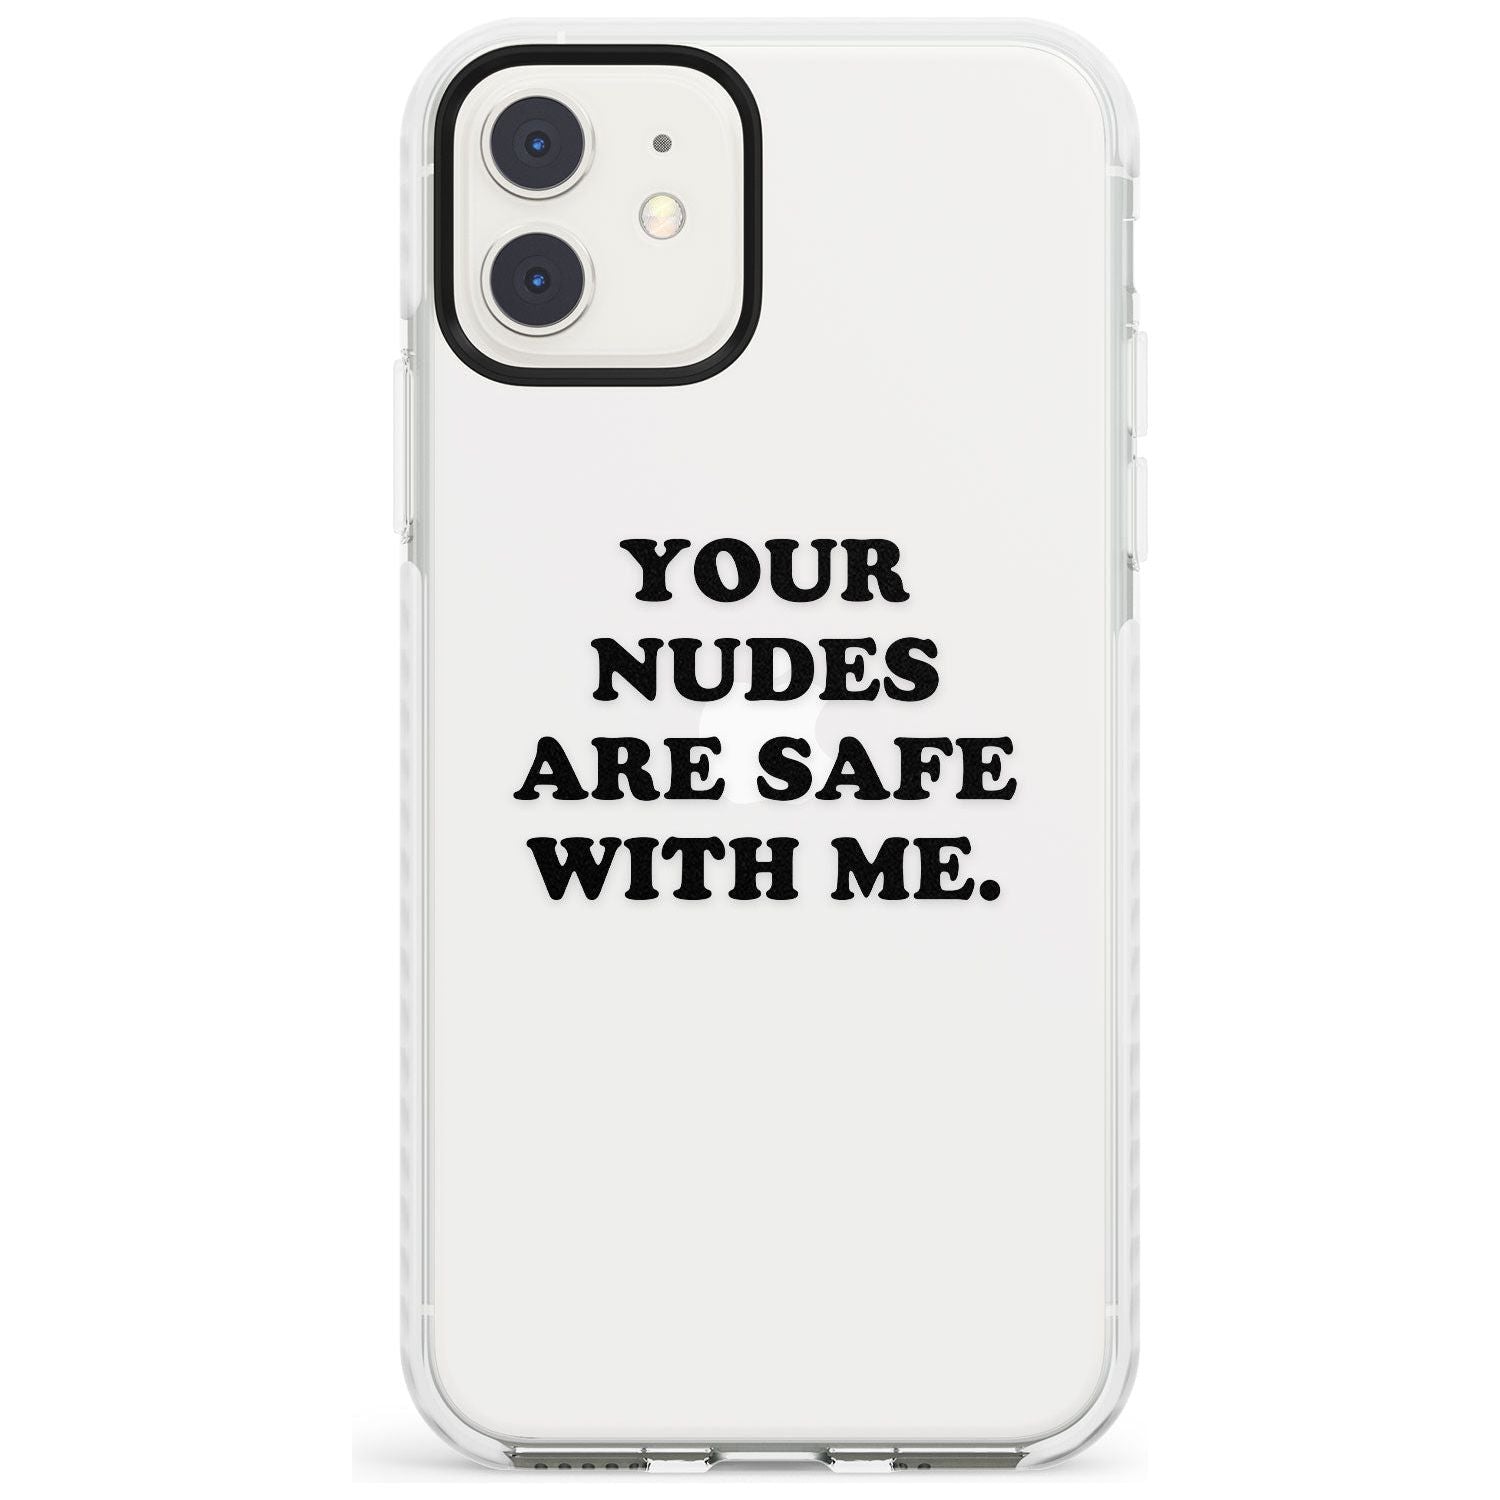 Your nudes are safe with me... BLACK Impact Phone Case for iPhone 11